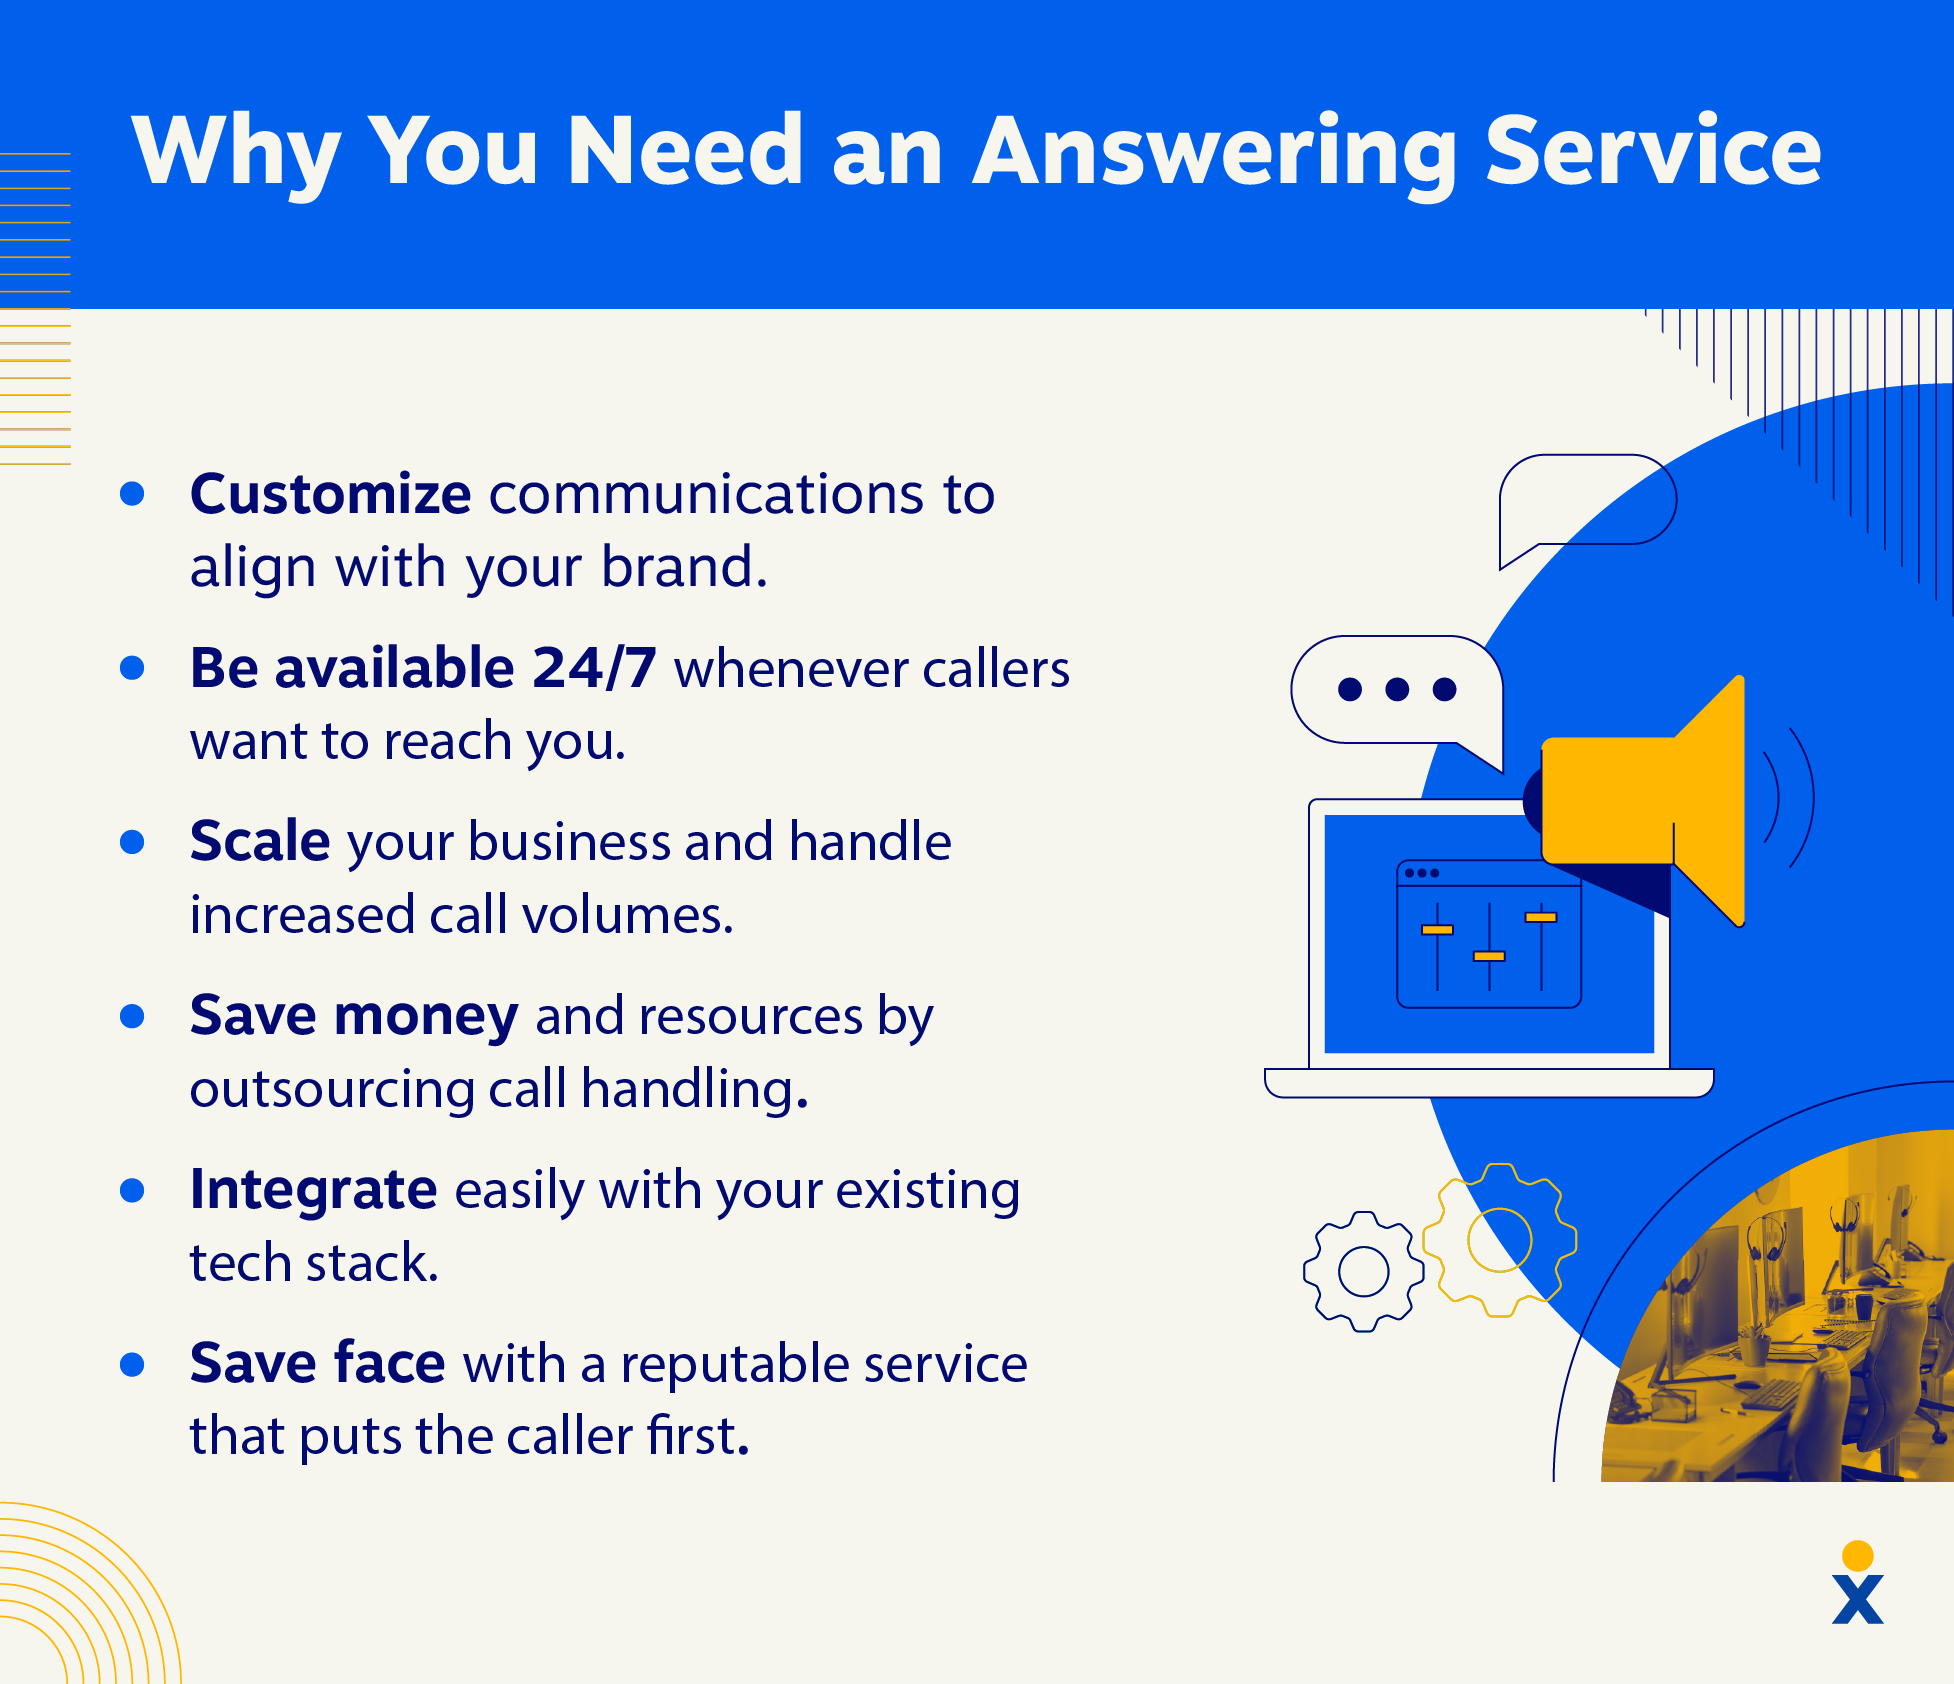 These are the benefits the best answering services offer small businesses.